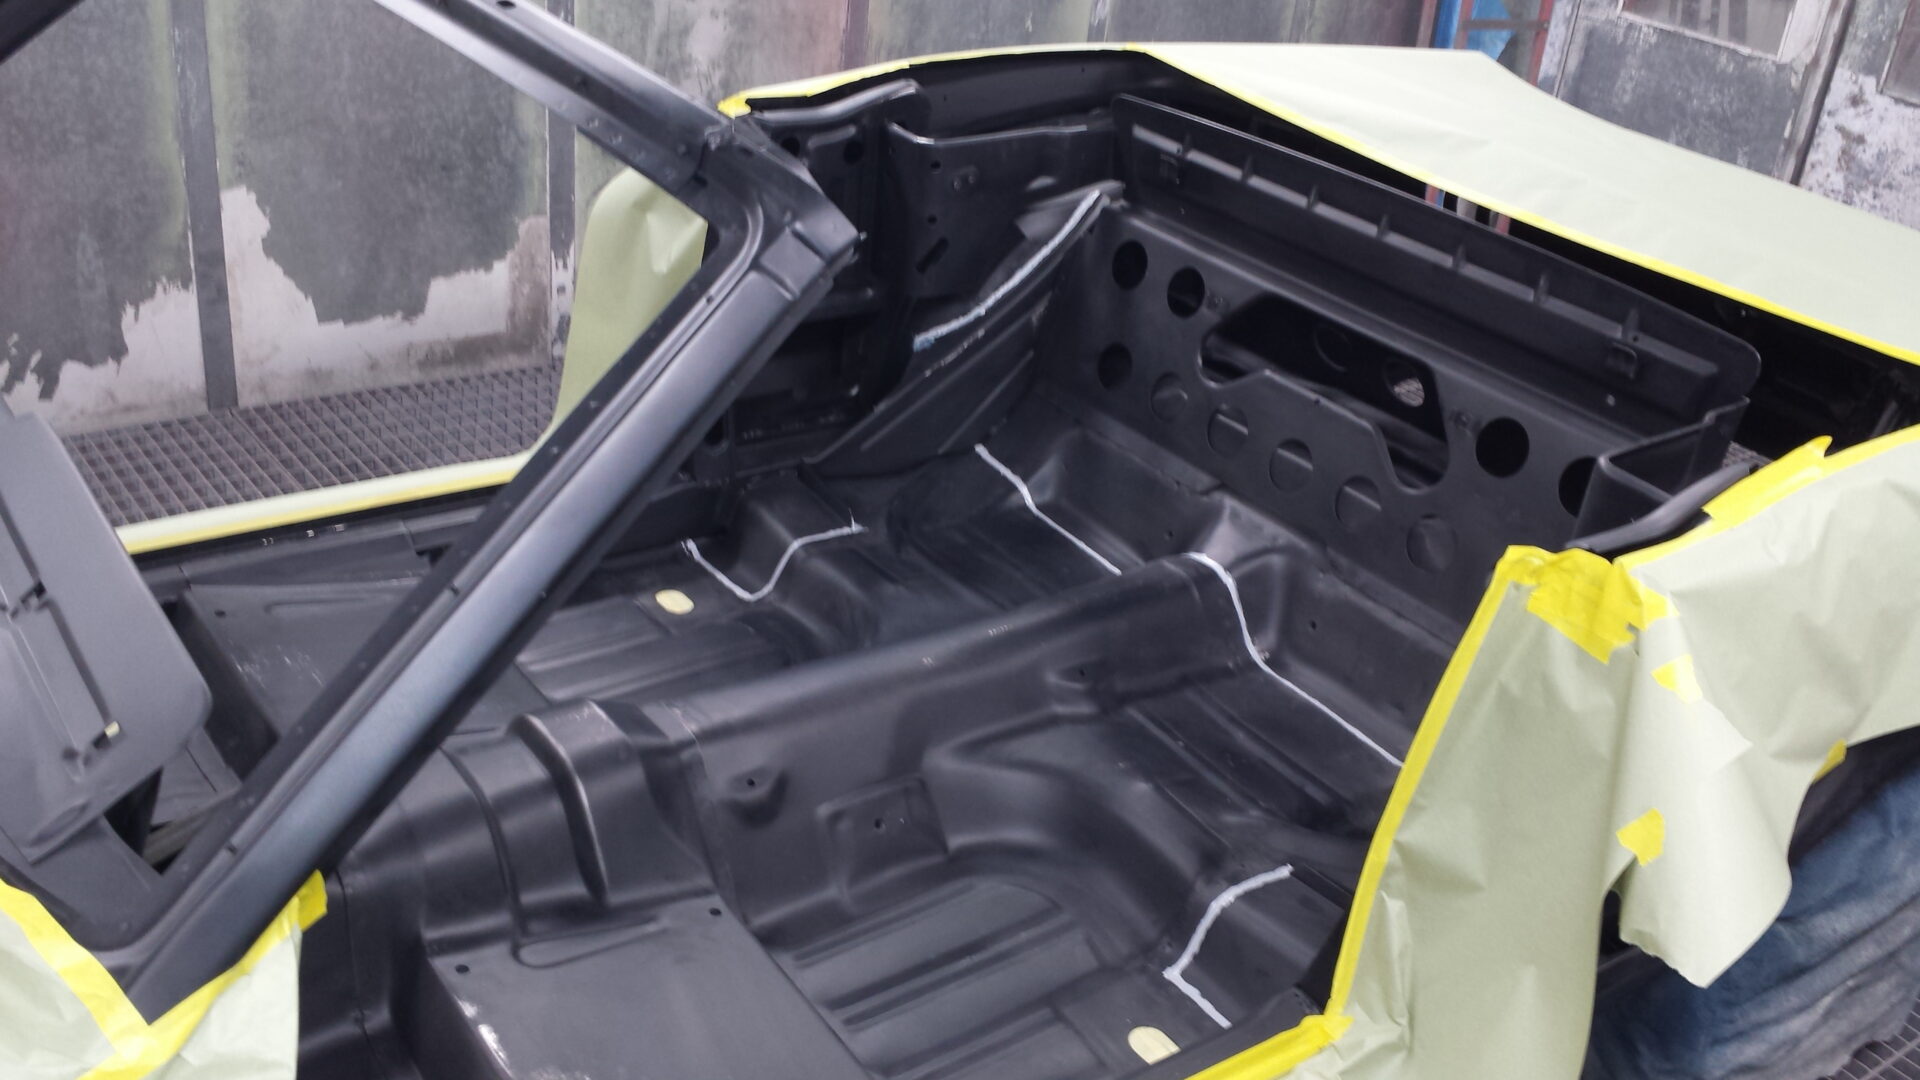 A close up on the interior frame of the 1967 Ford Mustang Convertible